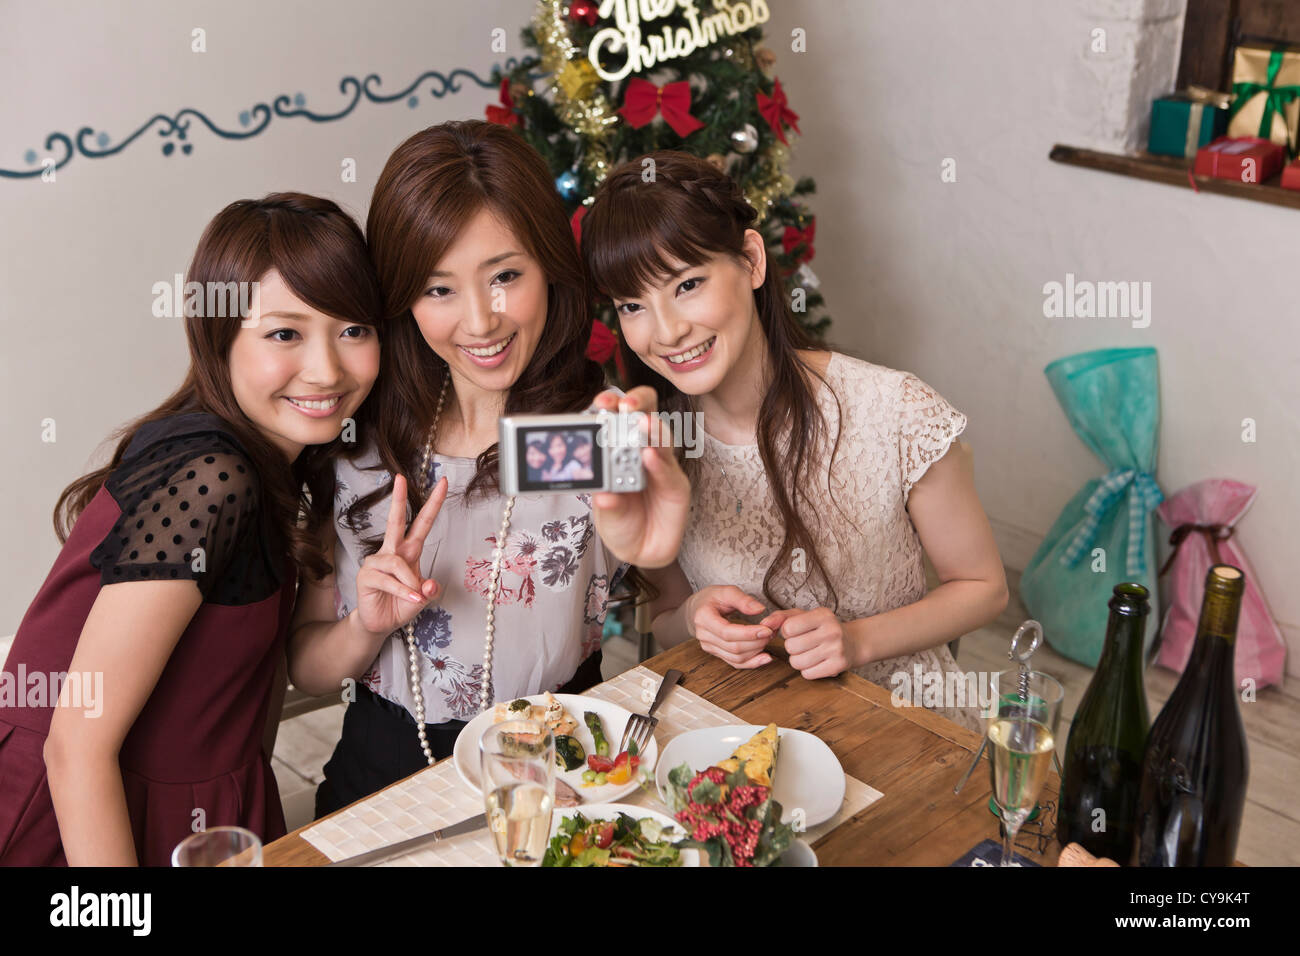 Three Young Women Taking Photograph with Digital Camera at Christmas Party Stock Photo